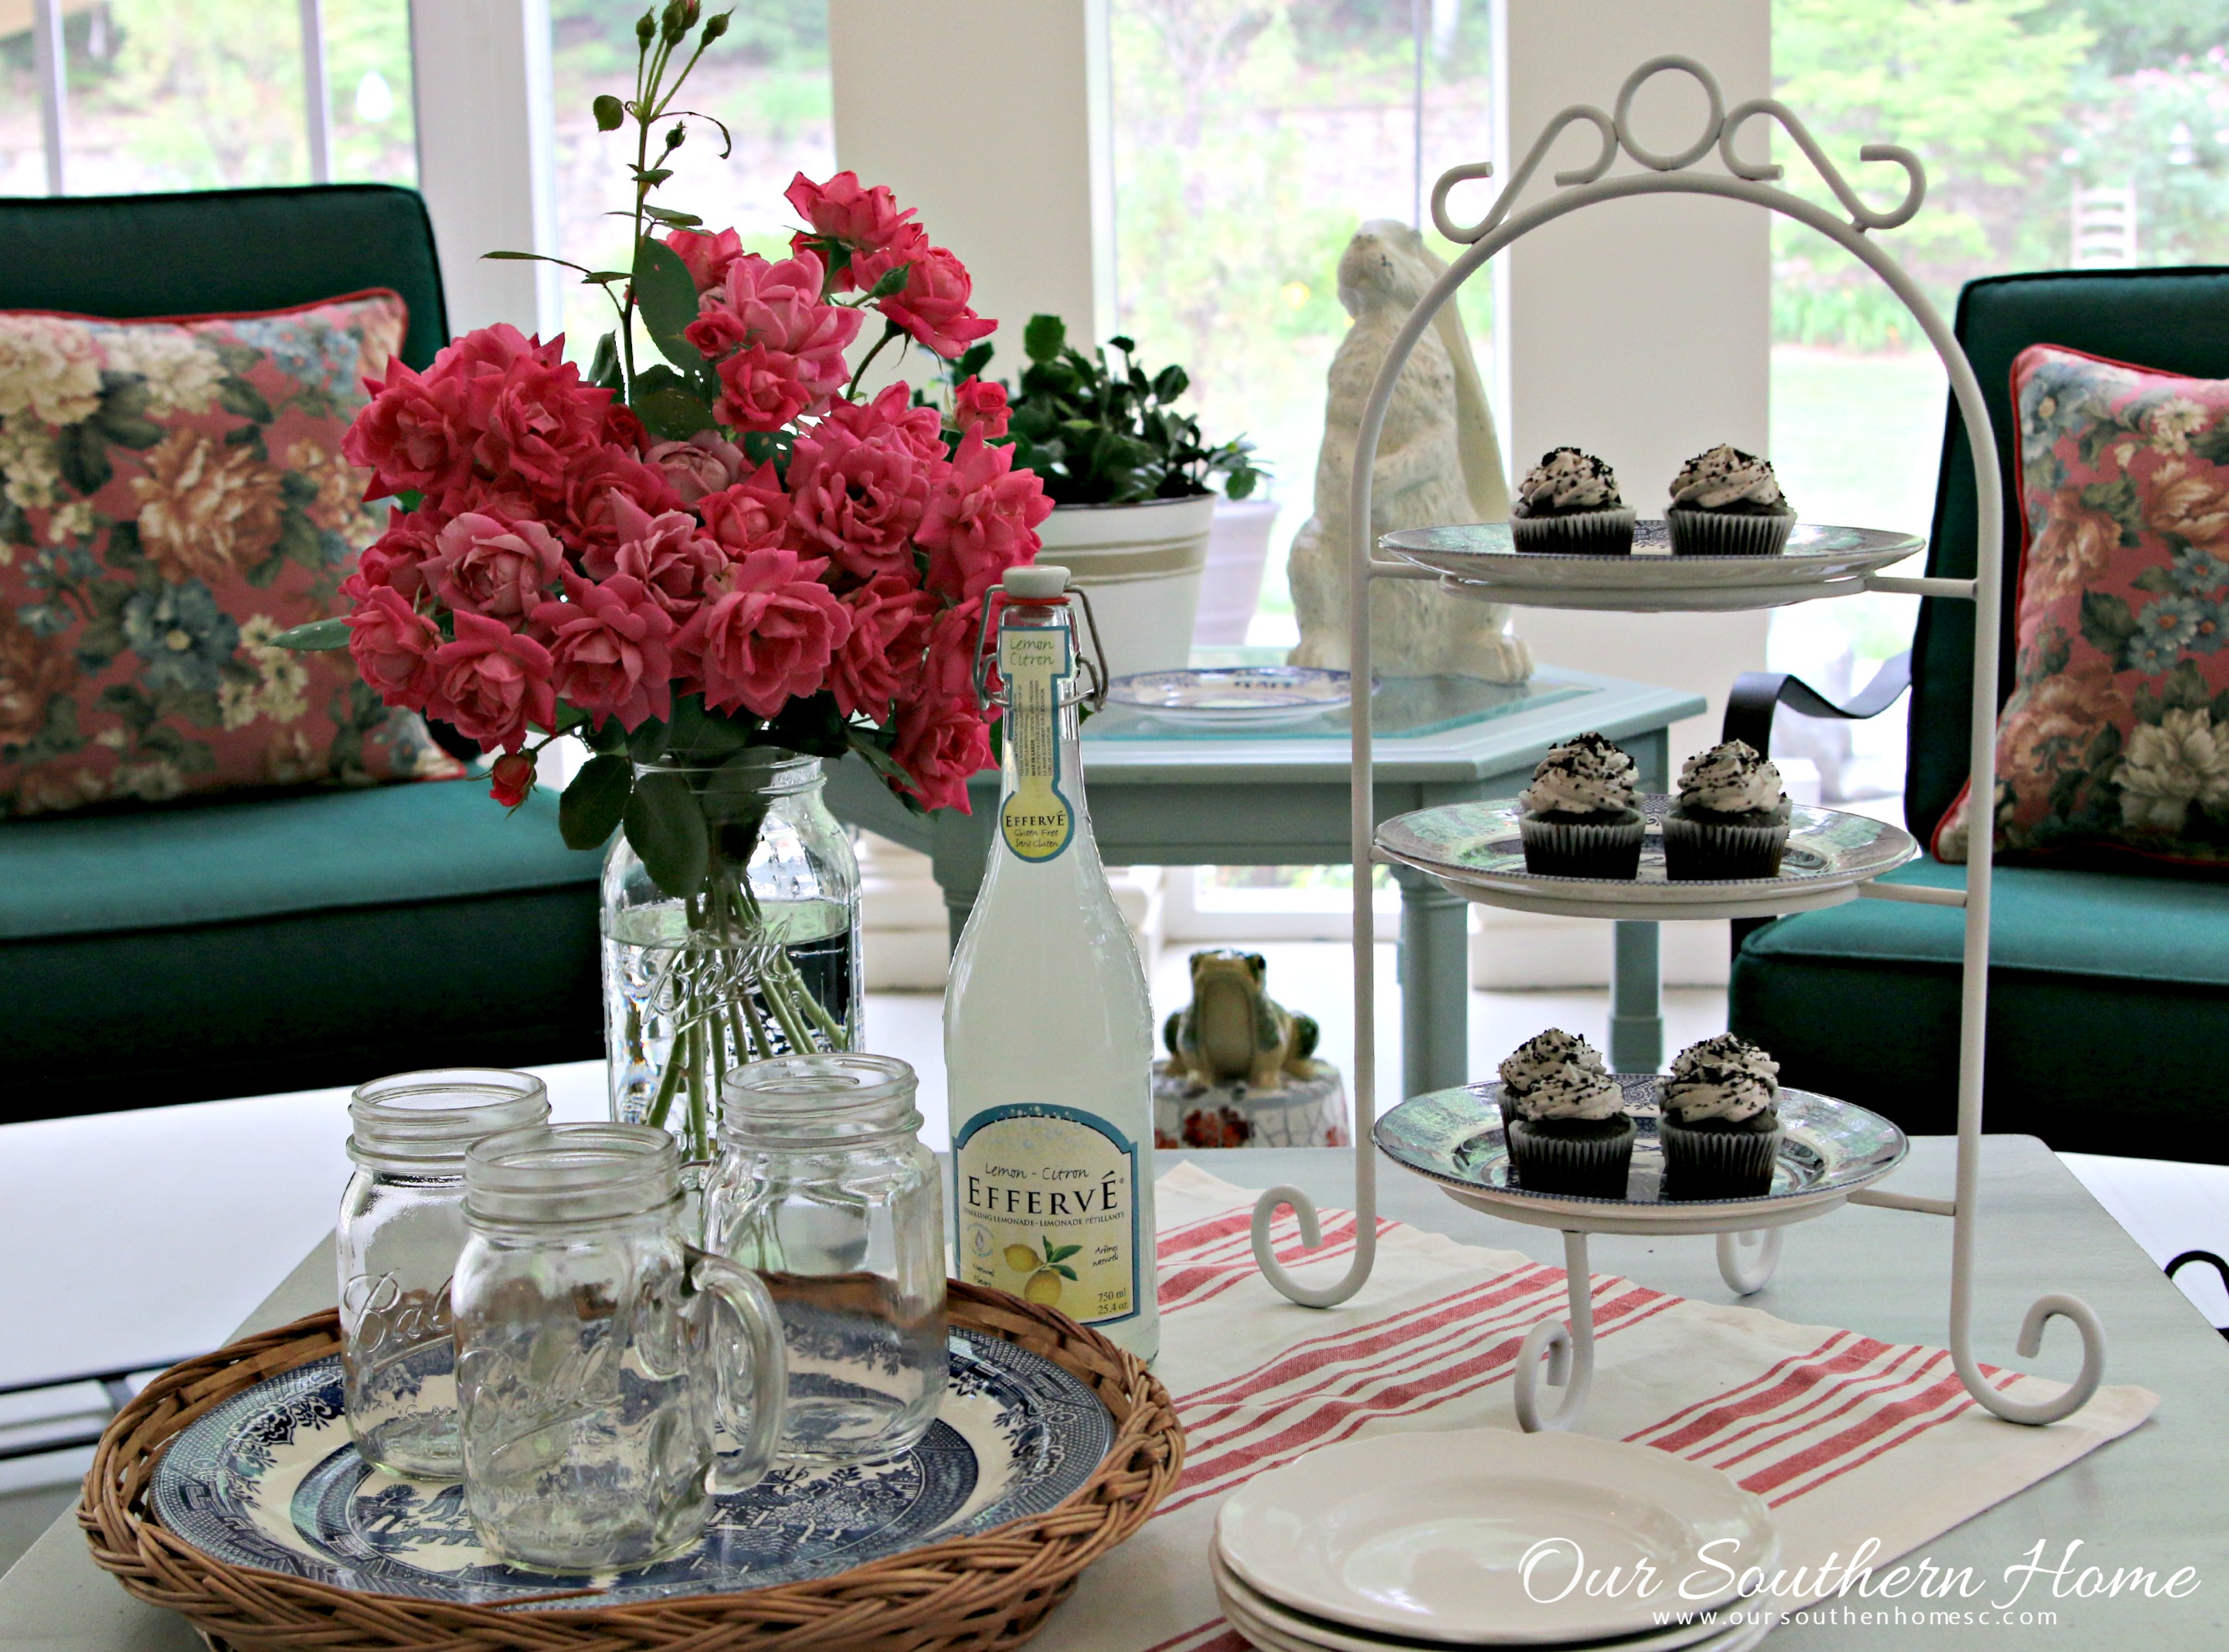 Thrift store plate stand makeover from Our Southern Home is wonderful for entertaining on the porch!